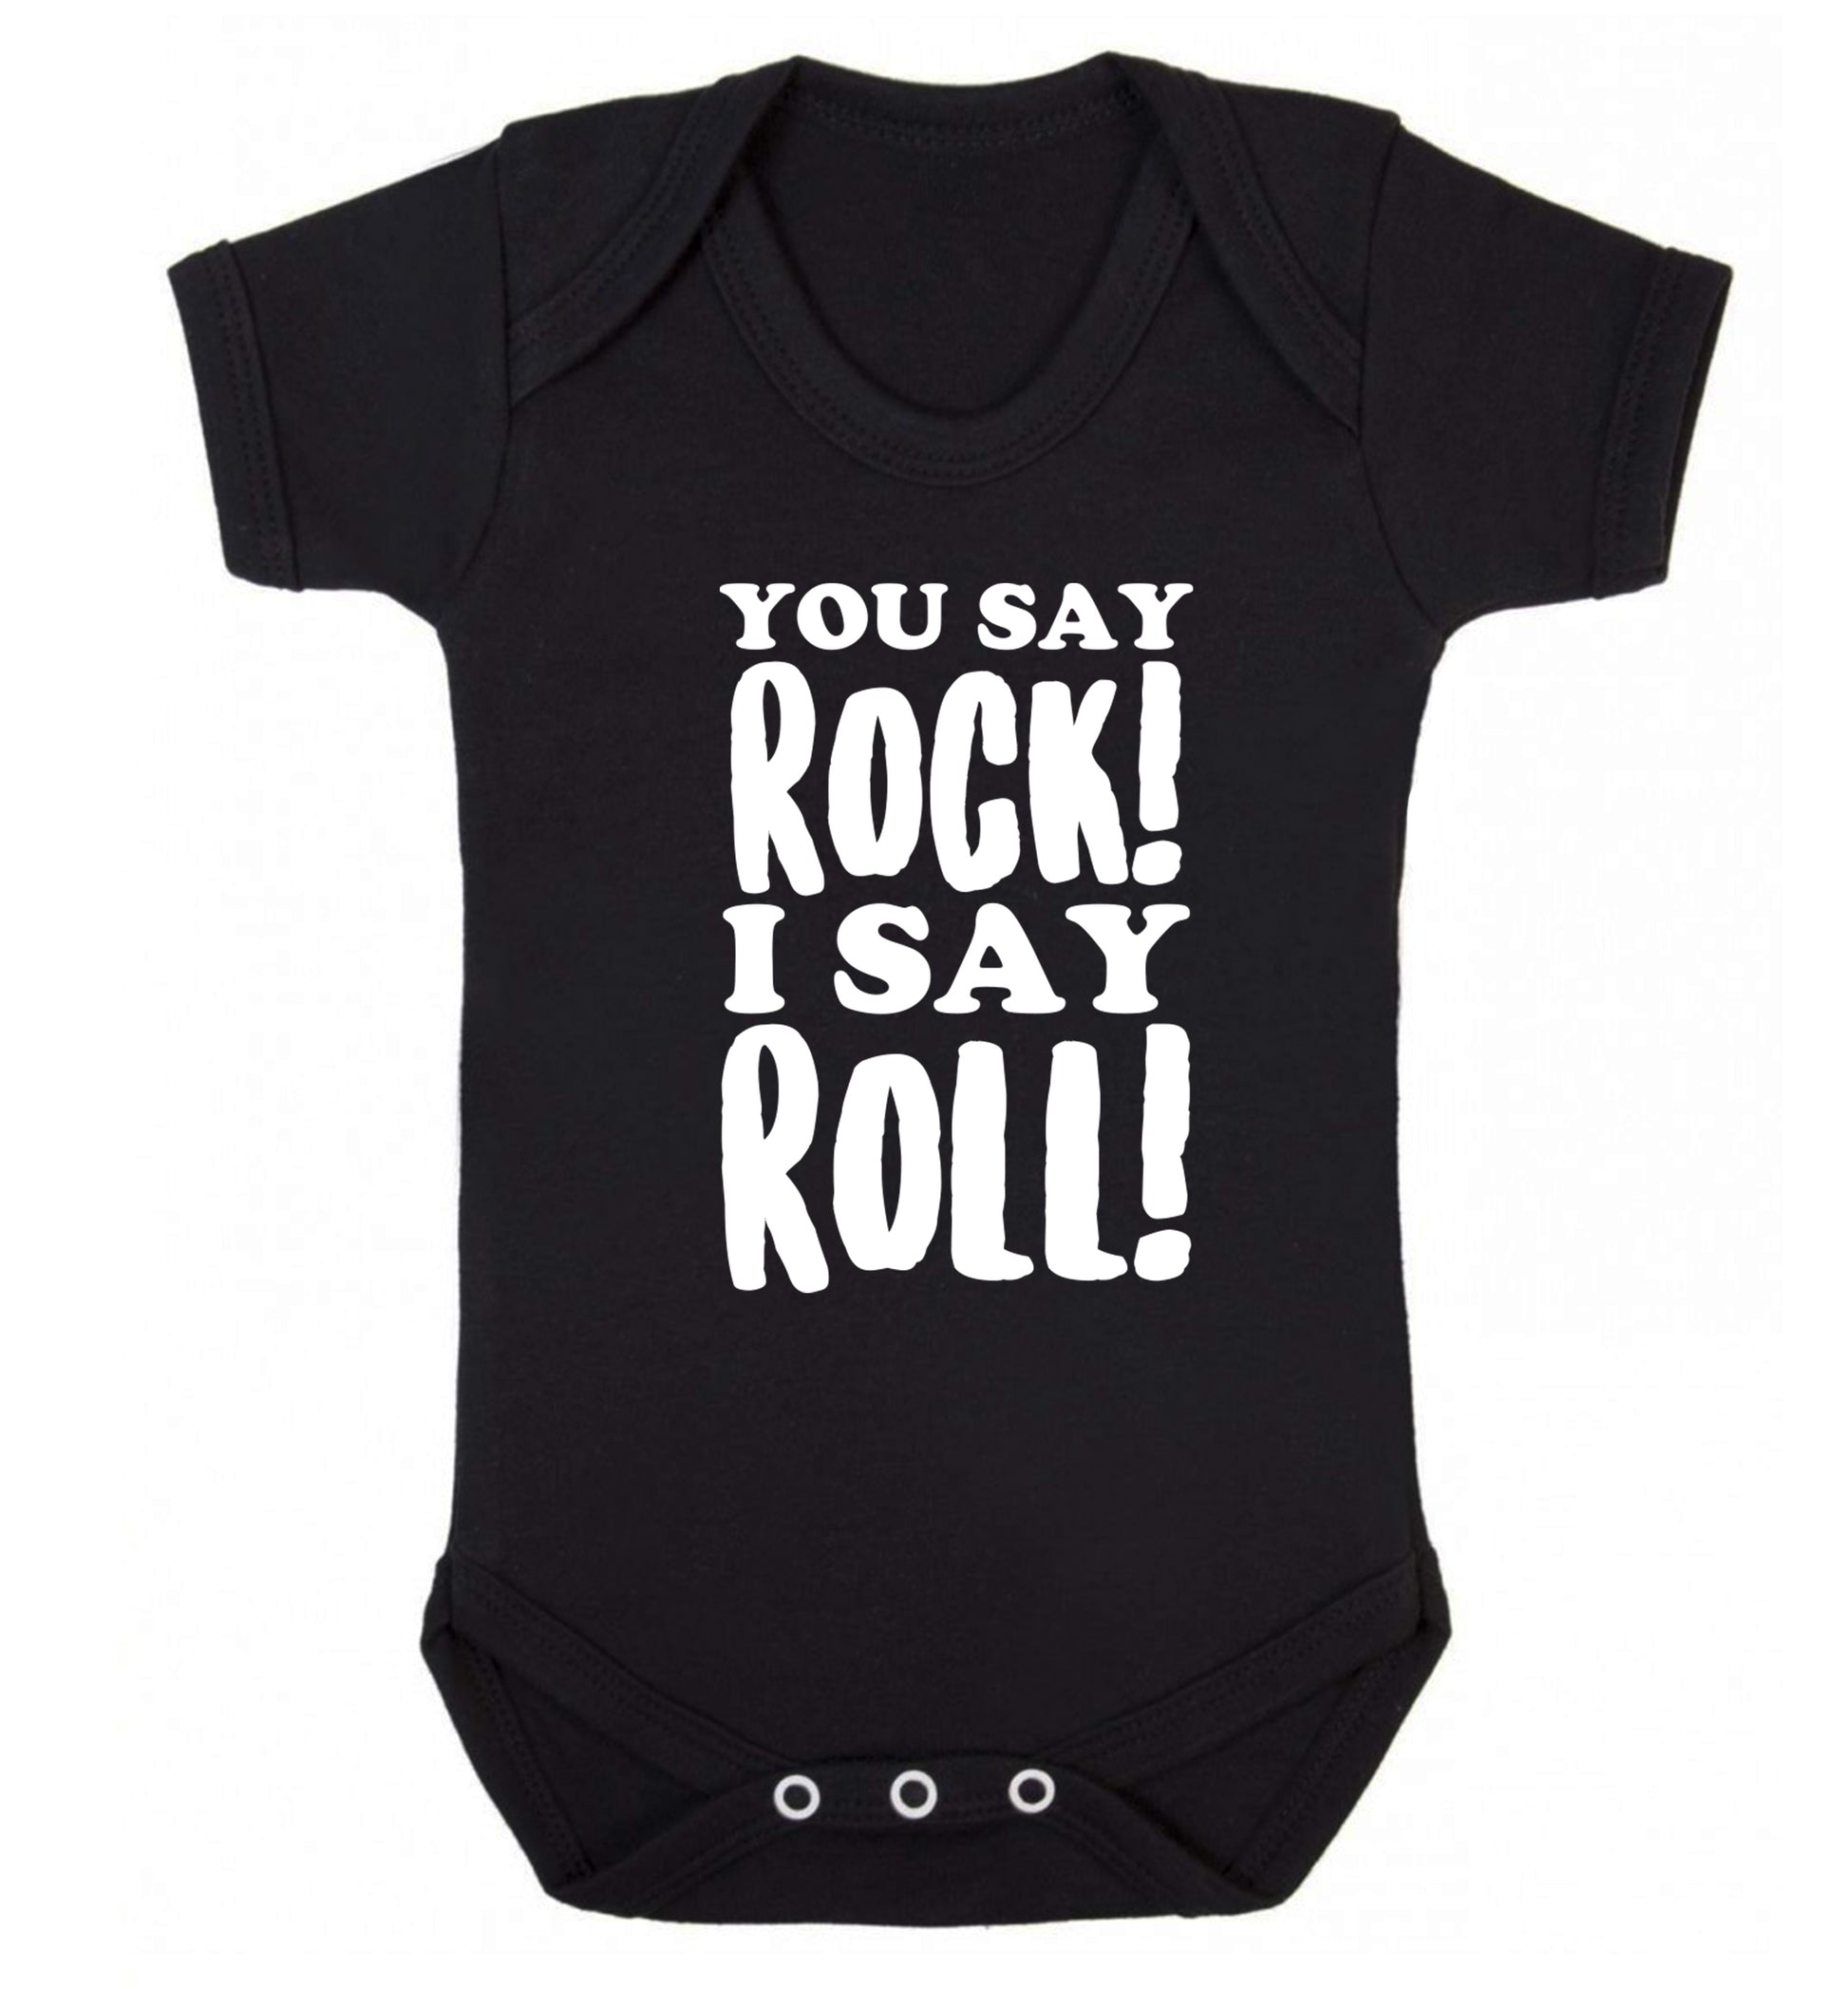 You say rock I say roll! Baby Vest black 18-24 months